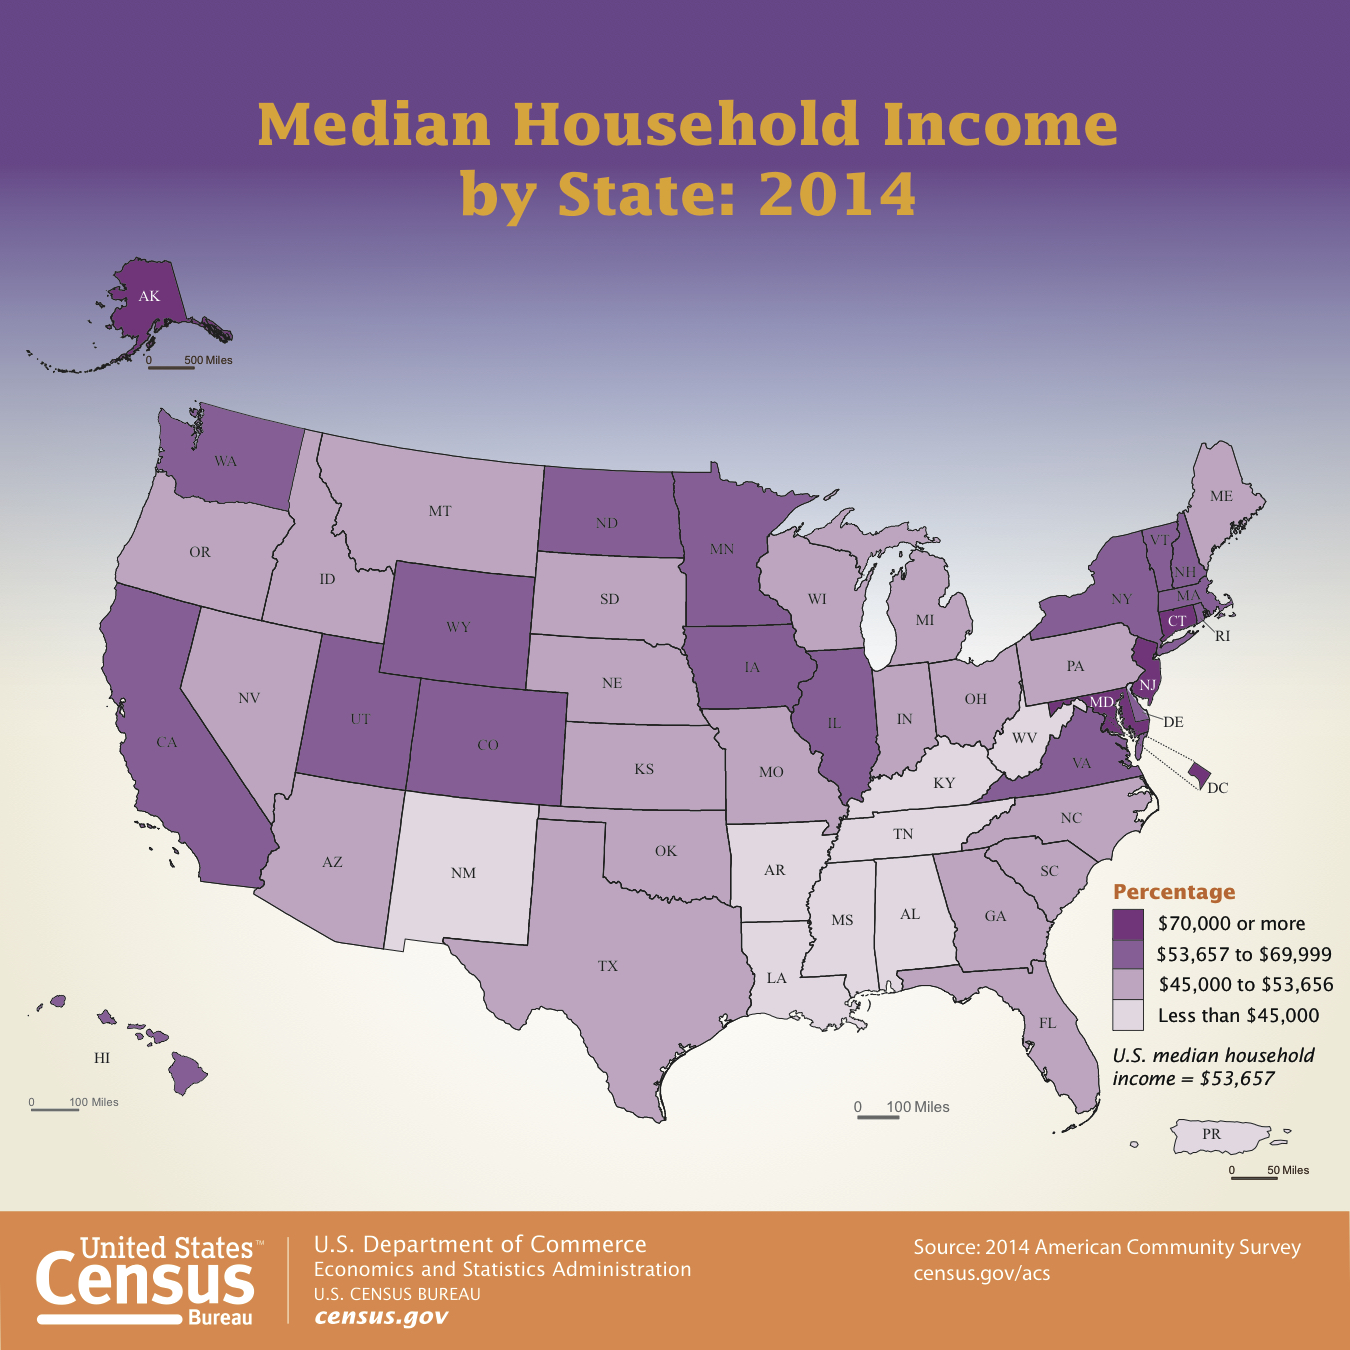 The darker the purple, the higher the median household income.